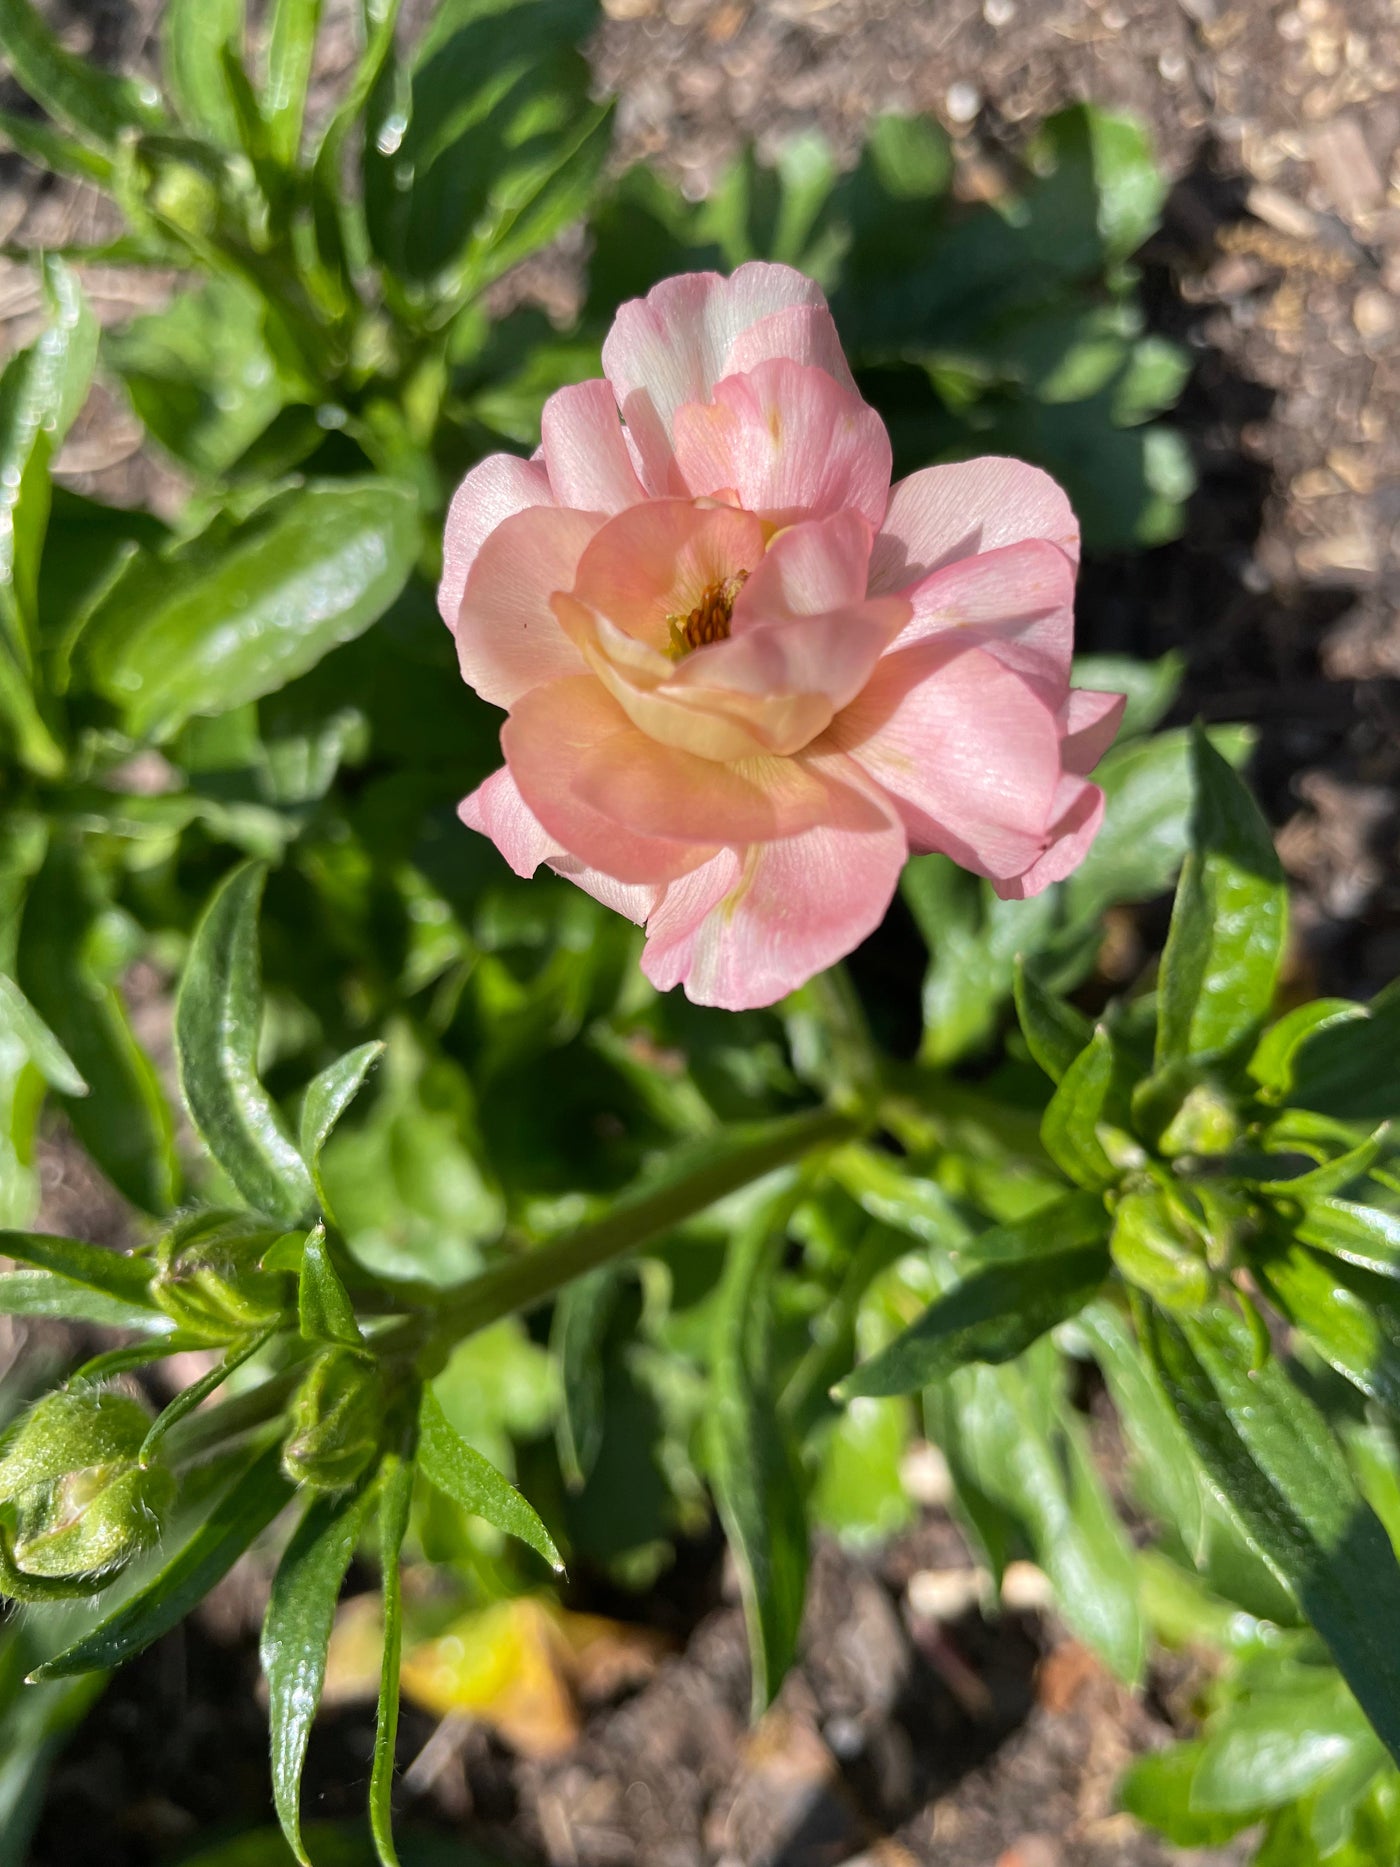 Single Ariadne Butterfly Ranunculus bloom still on the plant. Light Pink glossy petals that get warmer at the center.